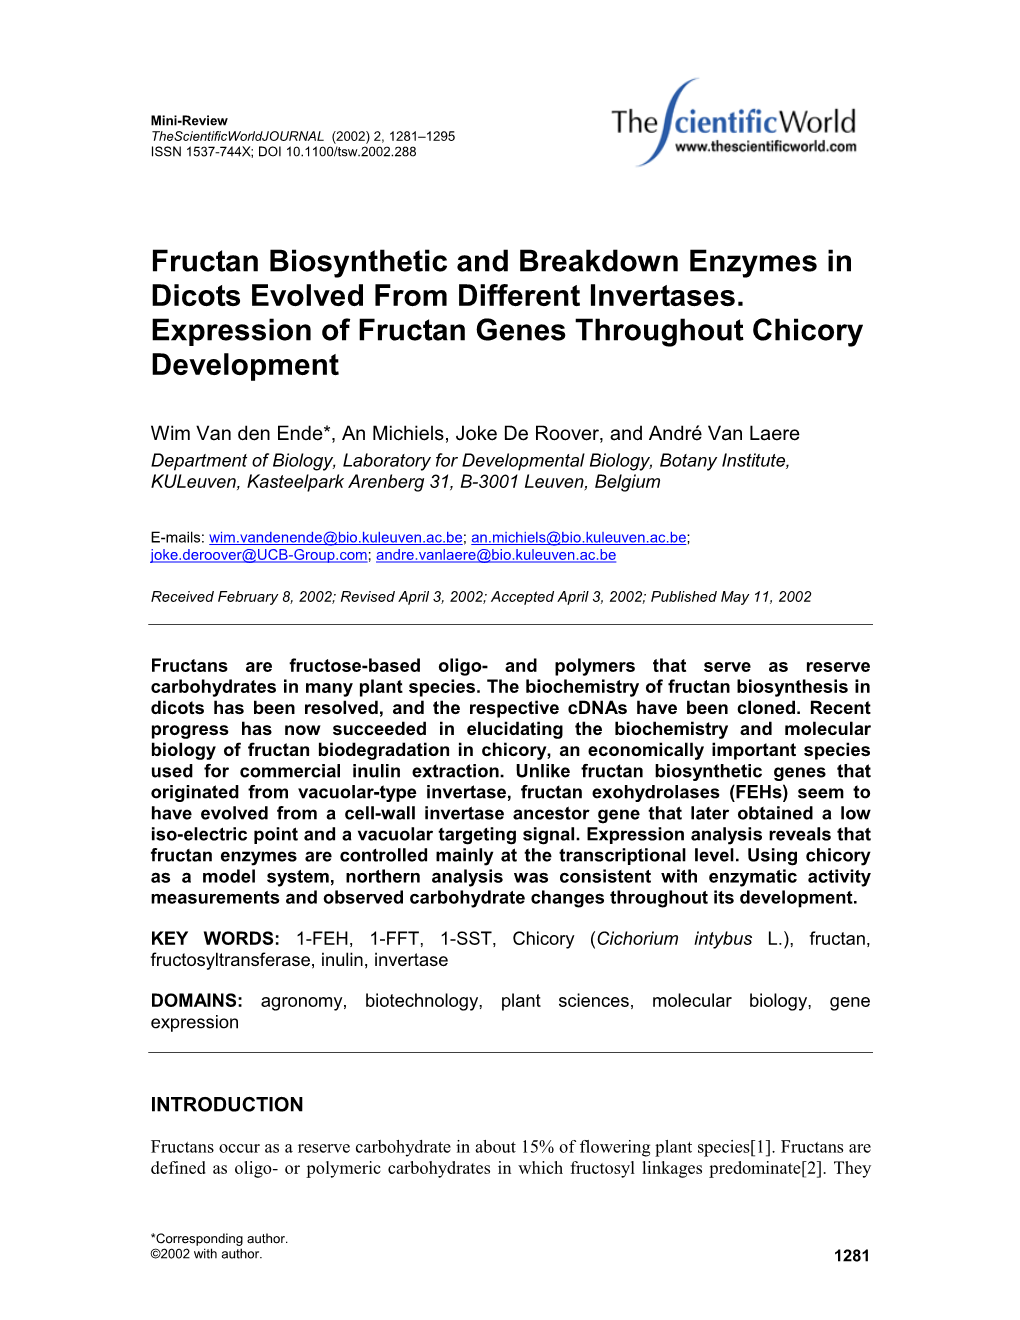 Fructan Biosynthetic and Breakdown Enzymes in Dicots Evolved from Different Invertases